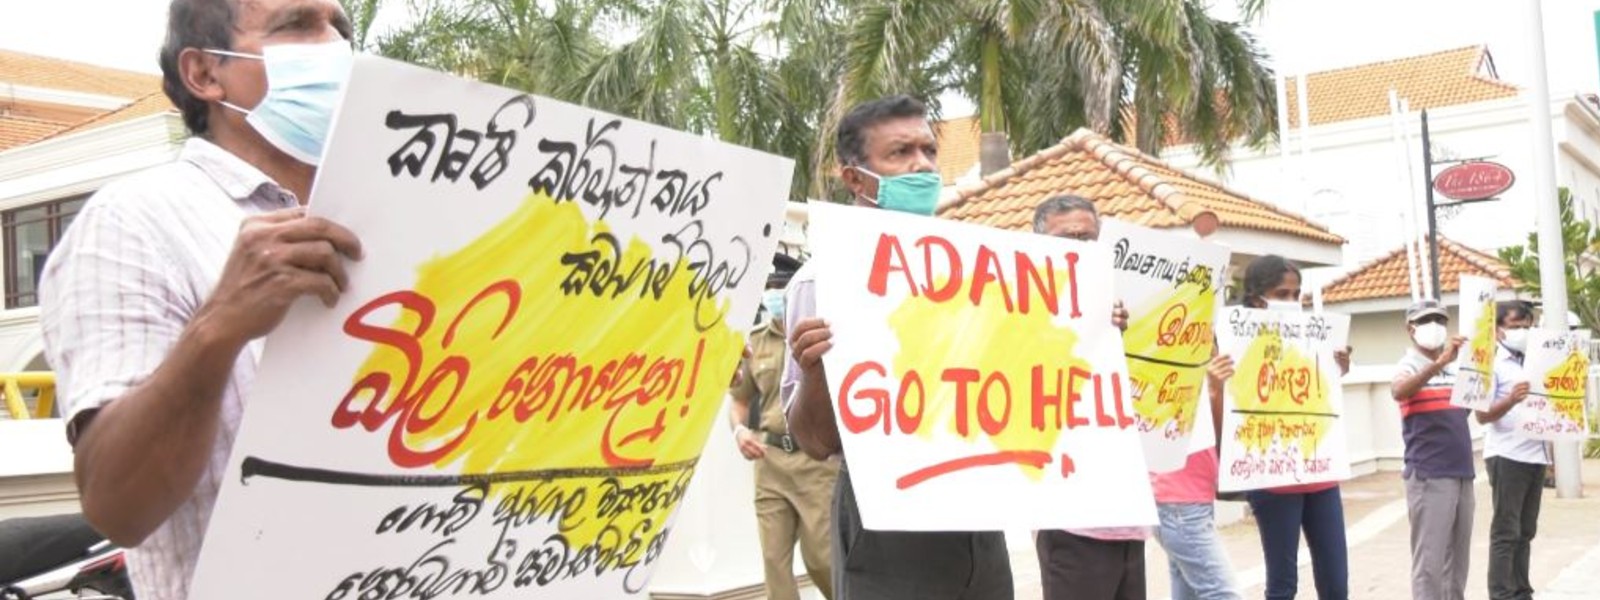 PROTEST OPPOSITE INDIAN HC AGAINST ADANI GROUP